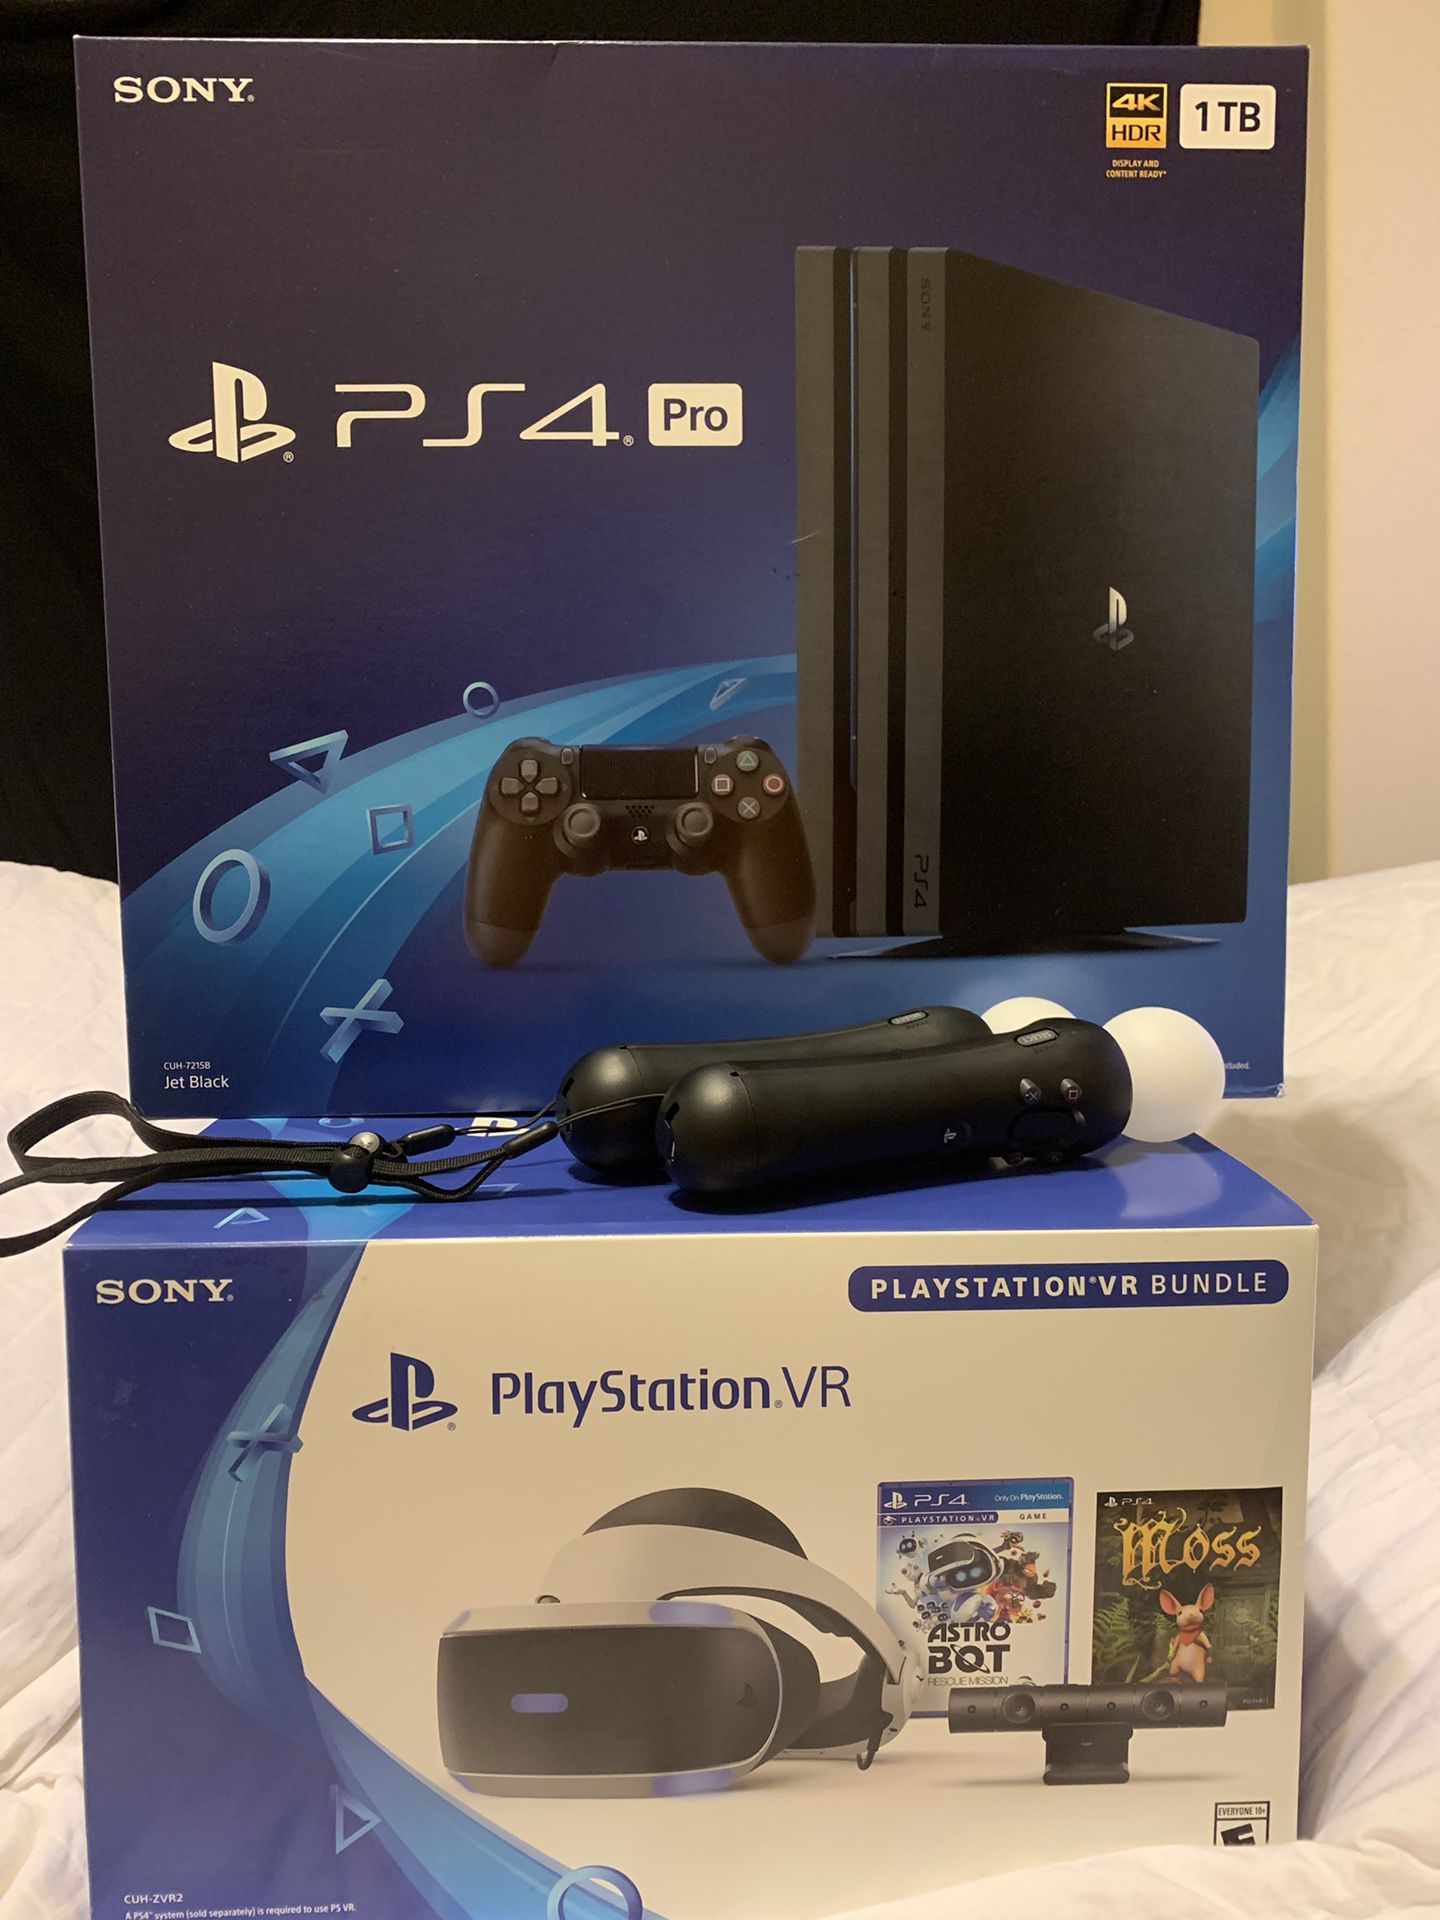 PS4 Pro and PS4 VR Headset Bundle (comes together)